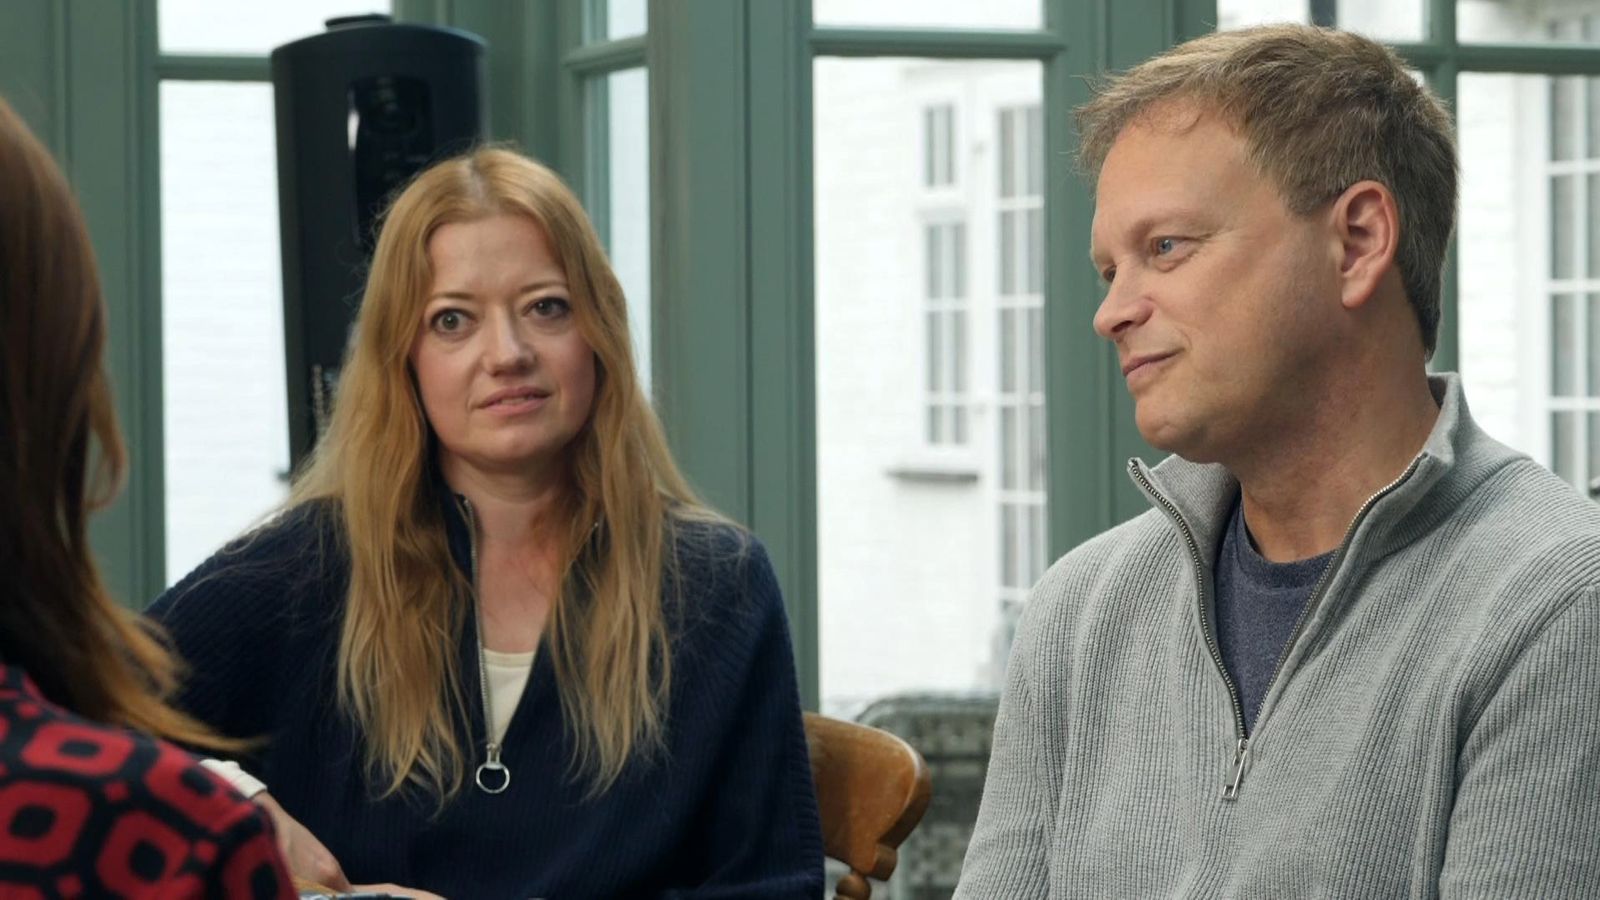 'It's an extended family': Grant Shapps and Ukrainian refugees describe living together